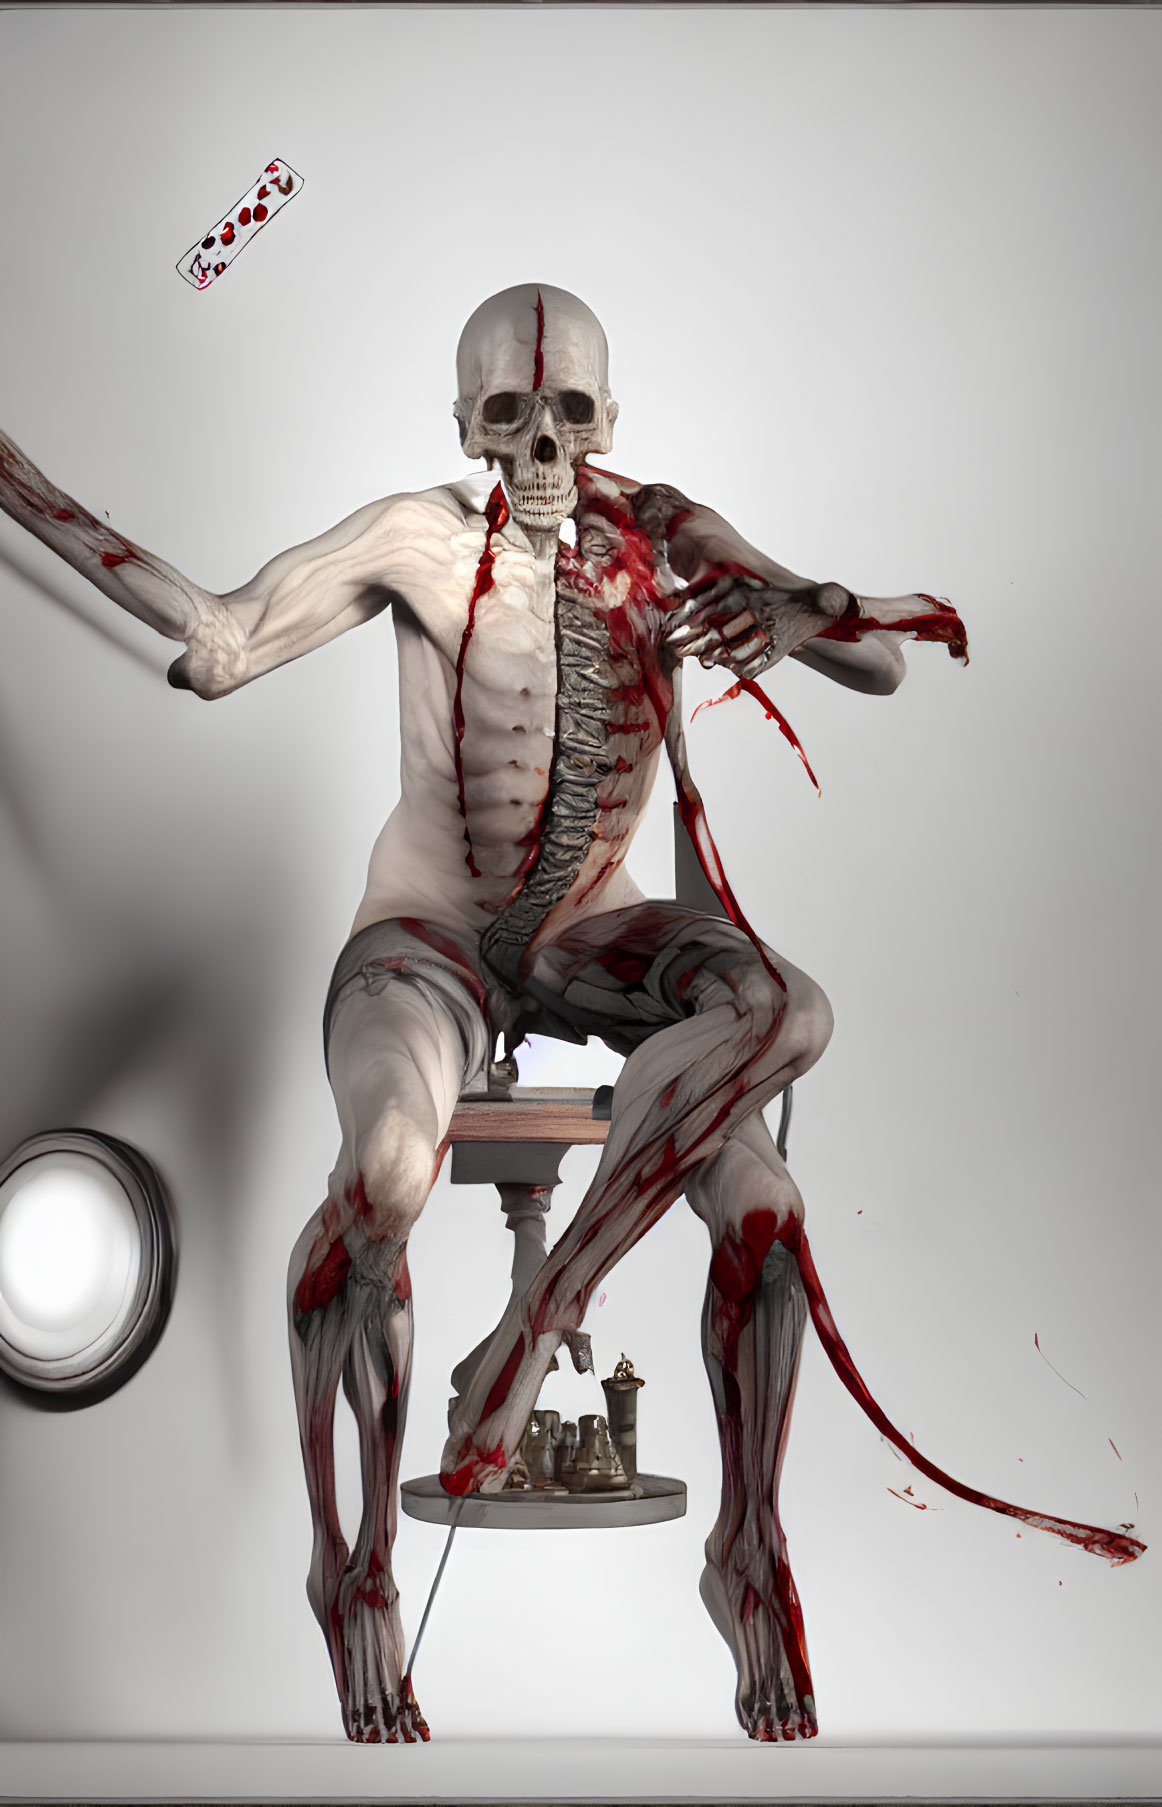 Detailed Skeleton Anatomy Illustration with Muscles, Chess Pieces, and Blood Splashes